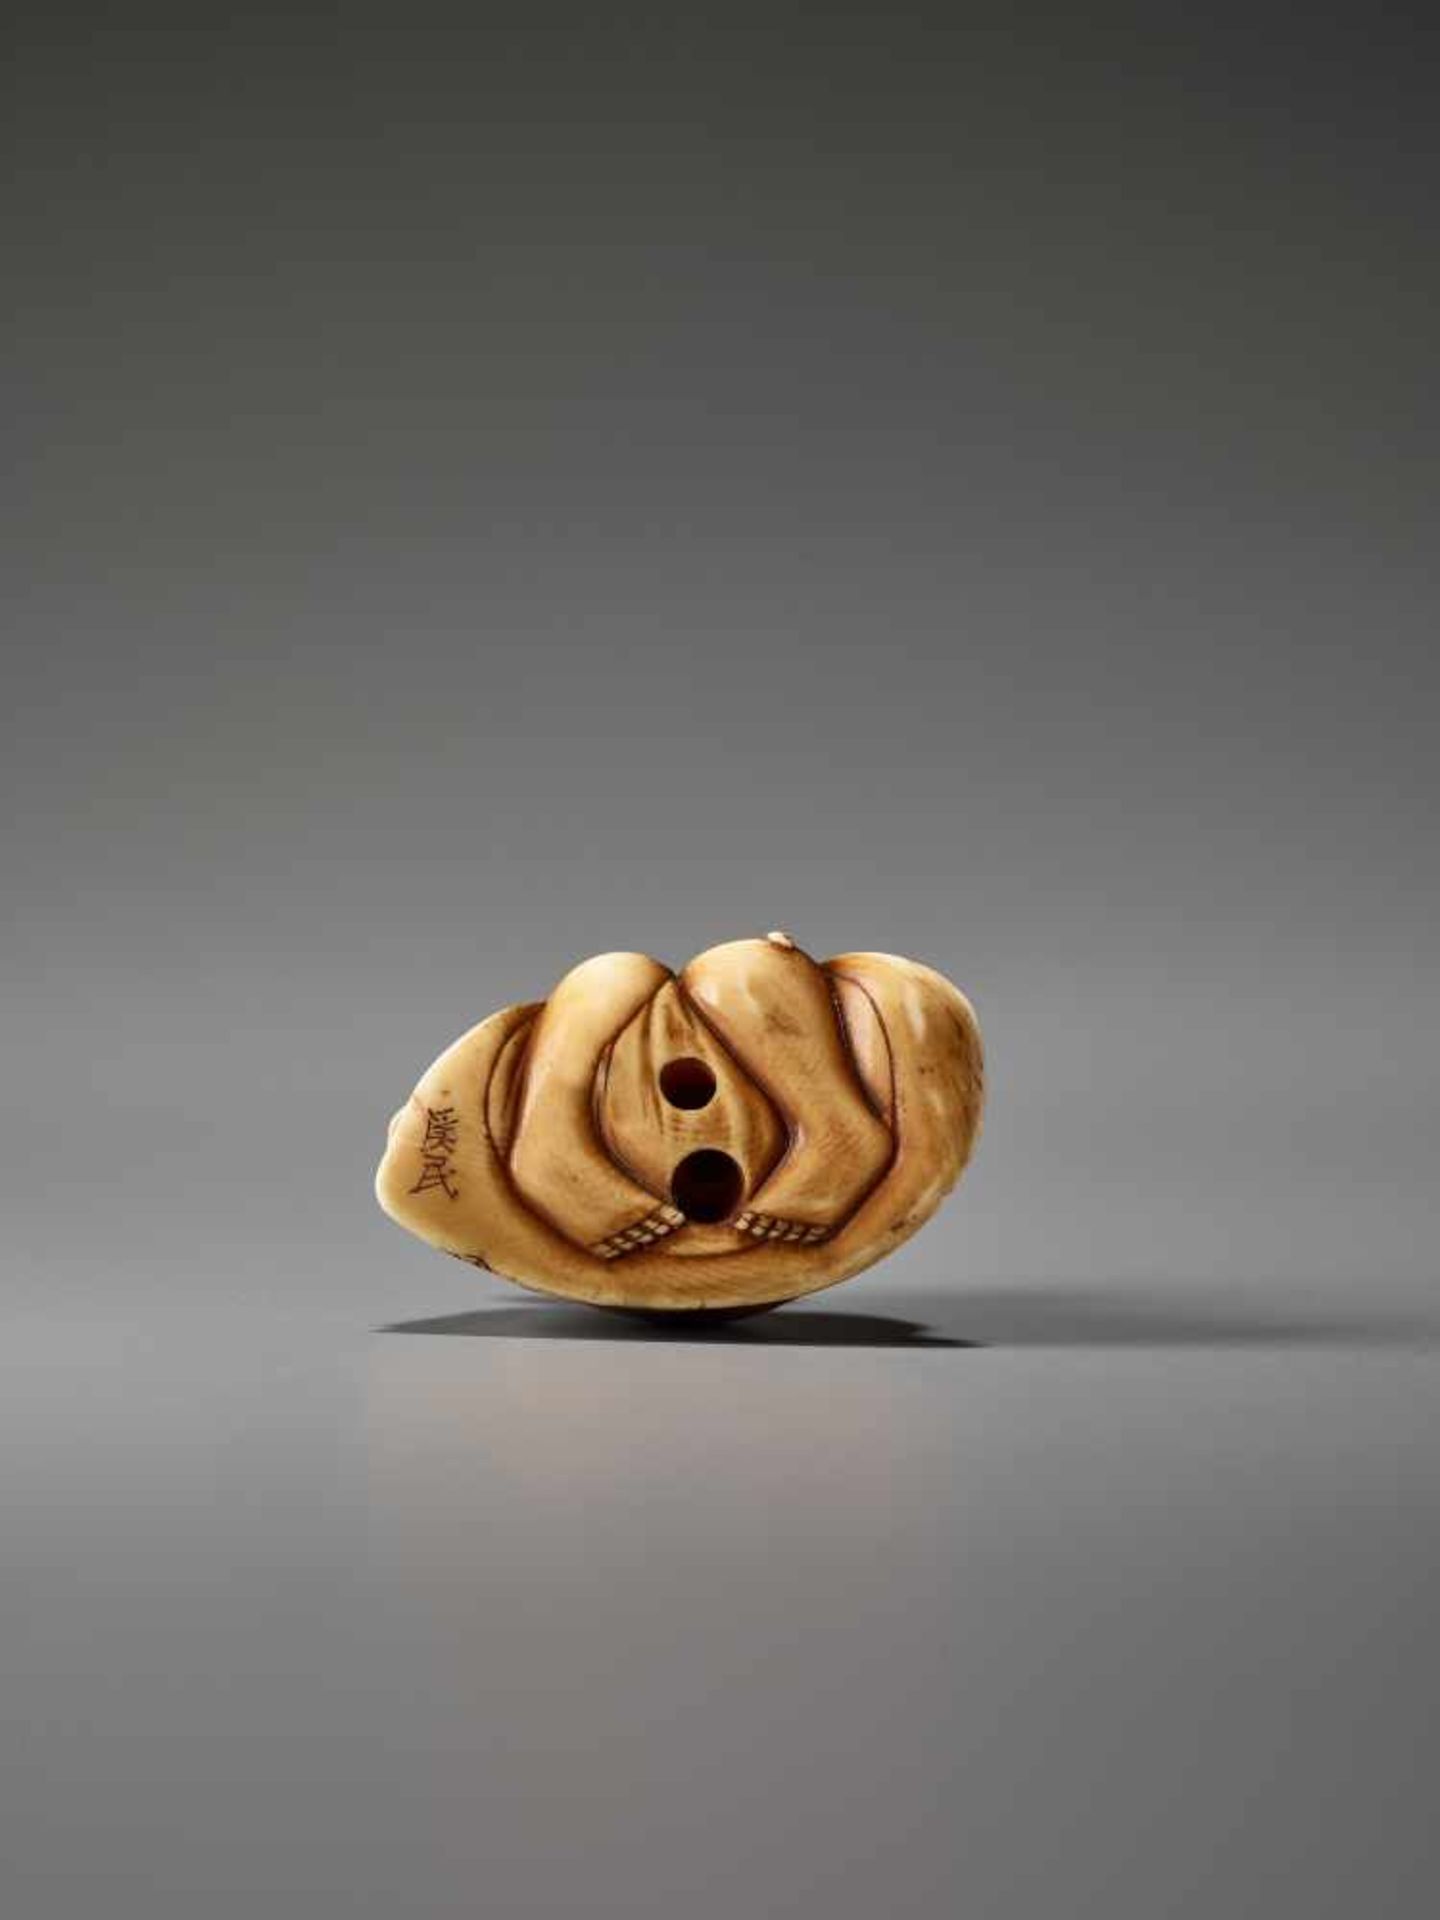 AN IVORY AND LACQUER NETSUKE OF OKAME WITH A SAKE CUP BY KEIMIN By Keimin, ivory netsuke with gold - Image 6 of 7